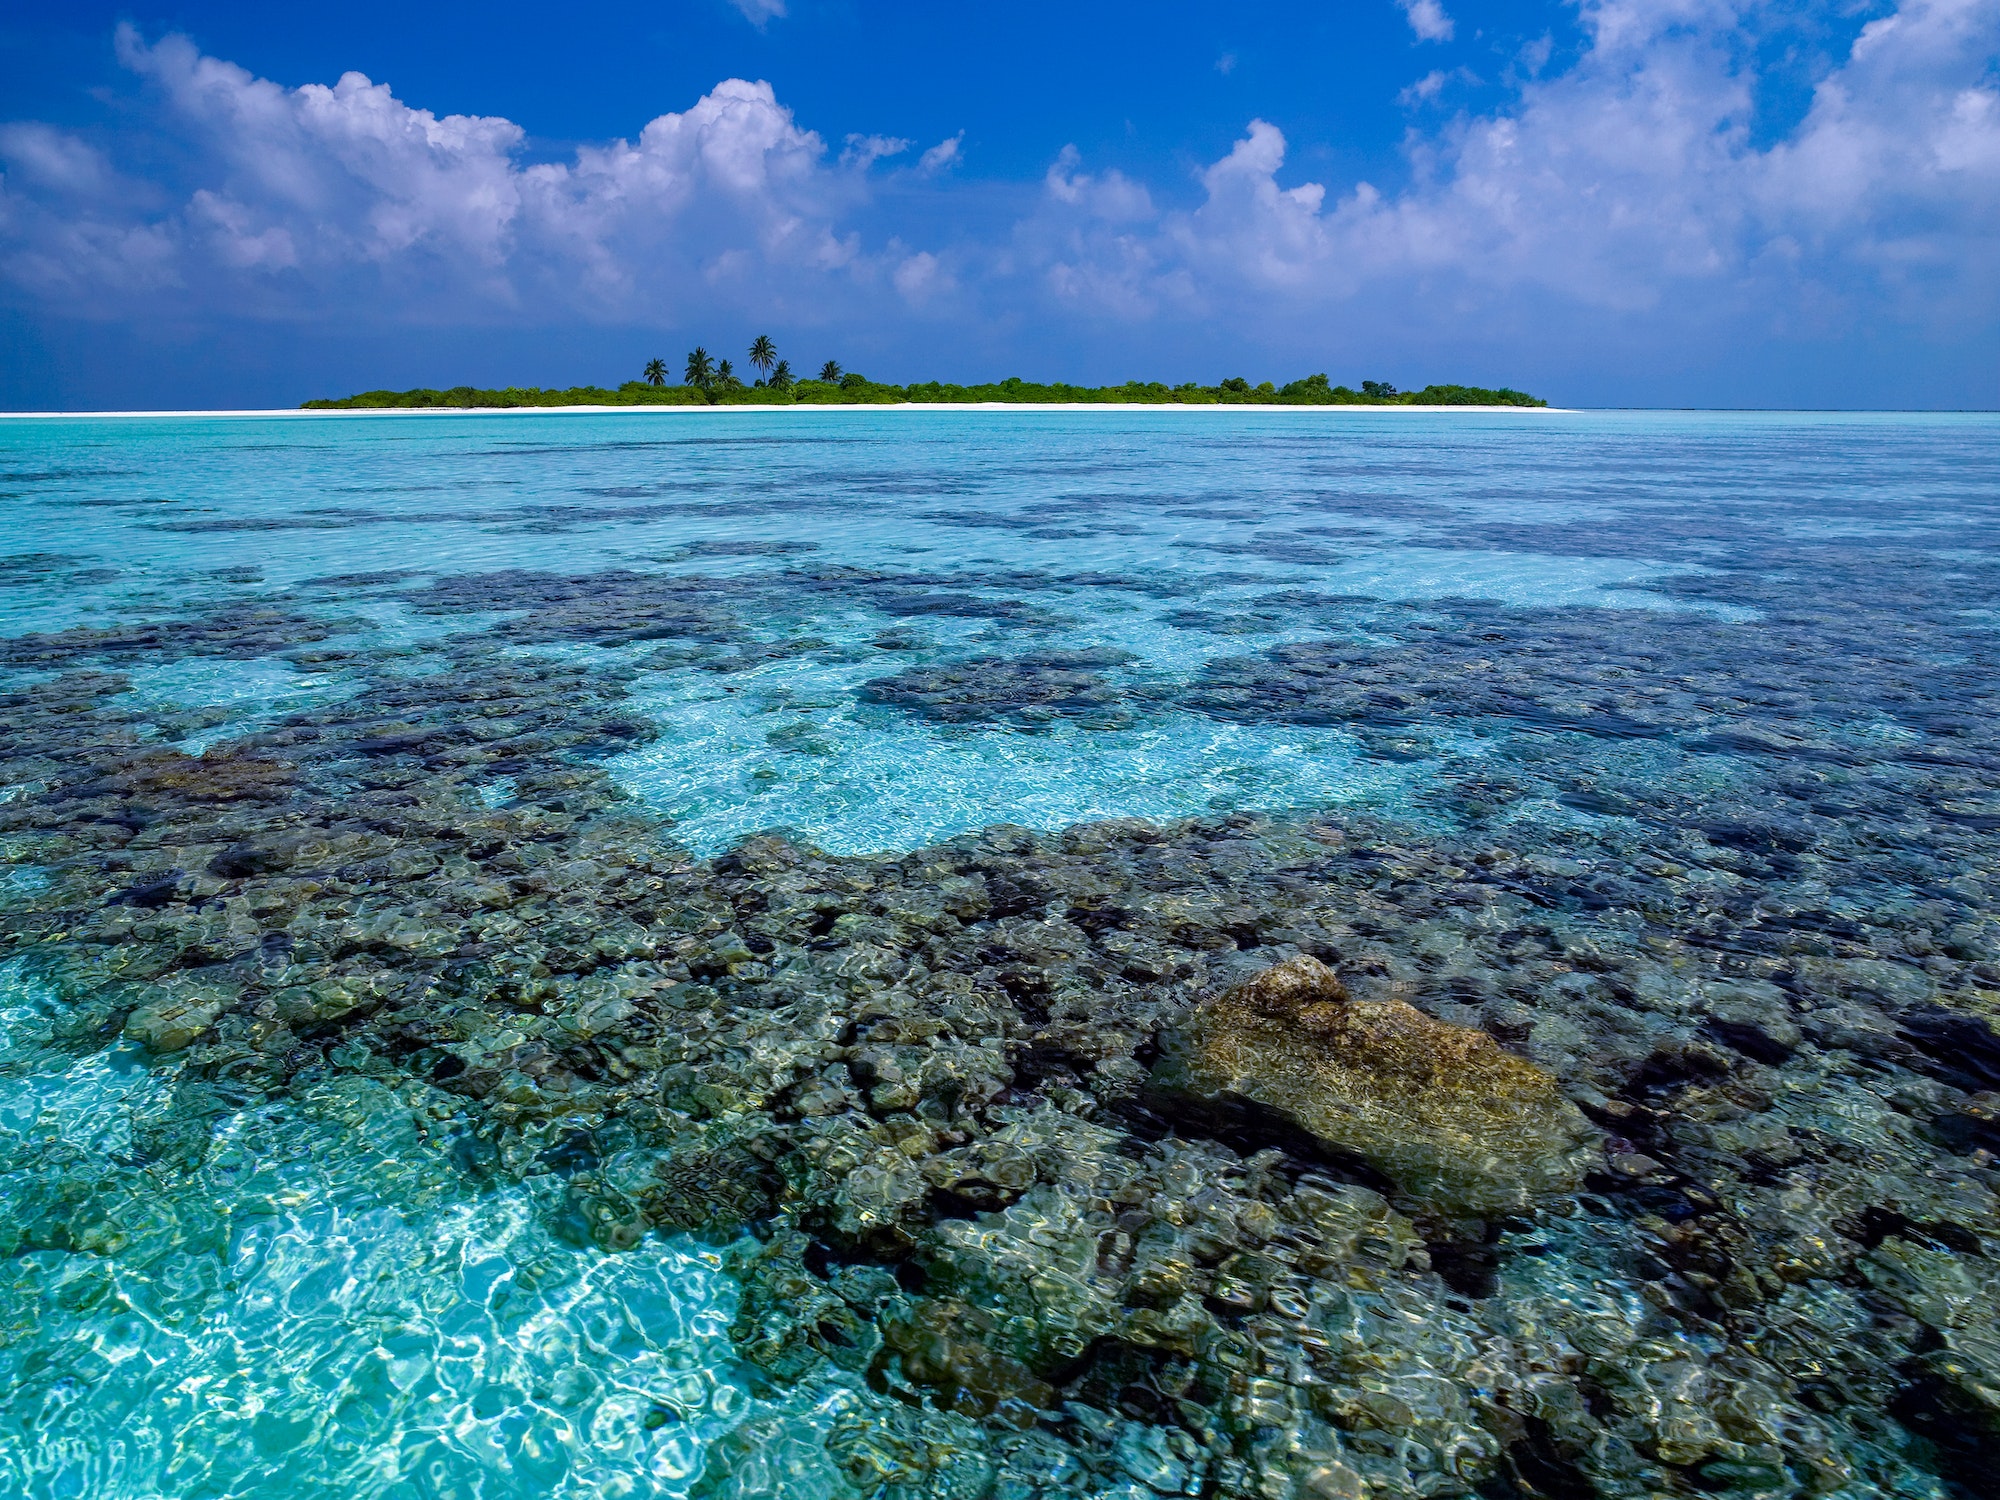 Coral Reef - The Maldives